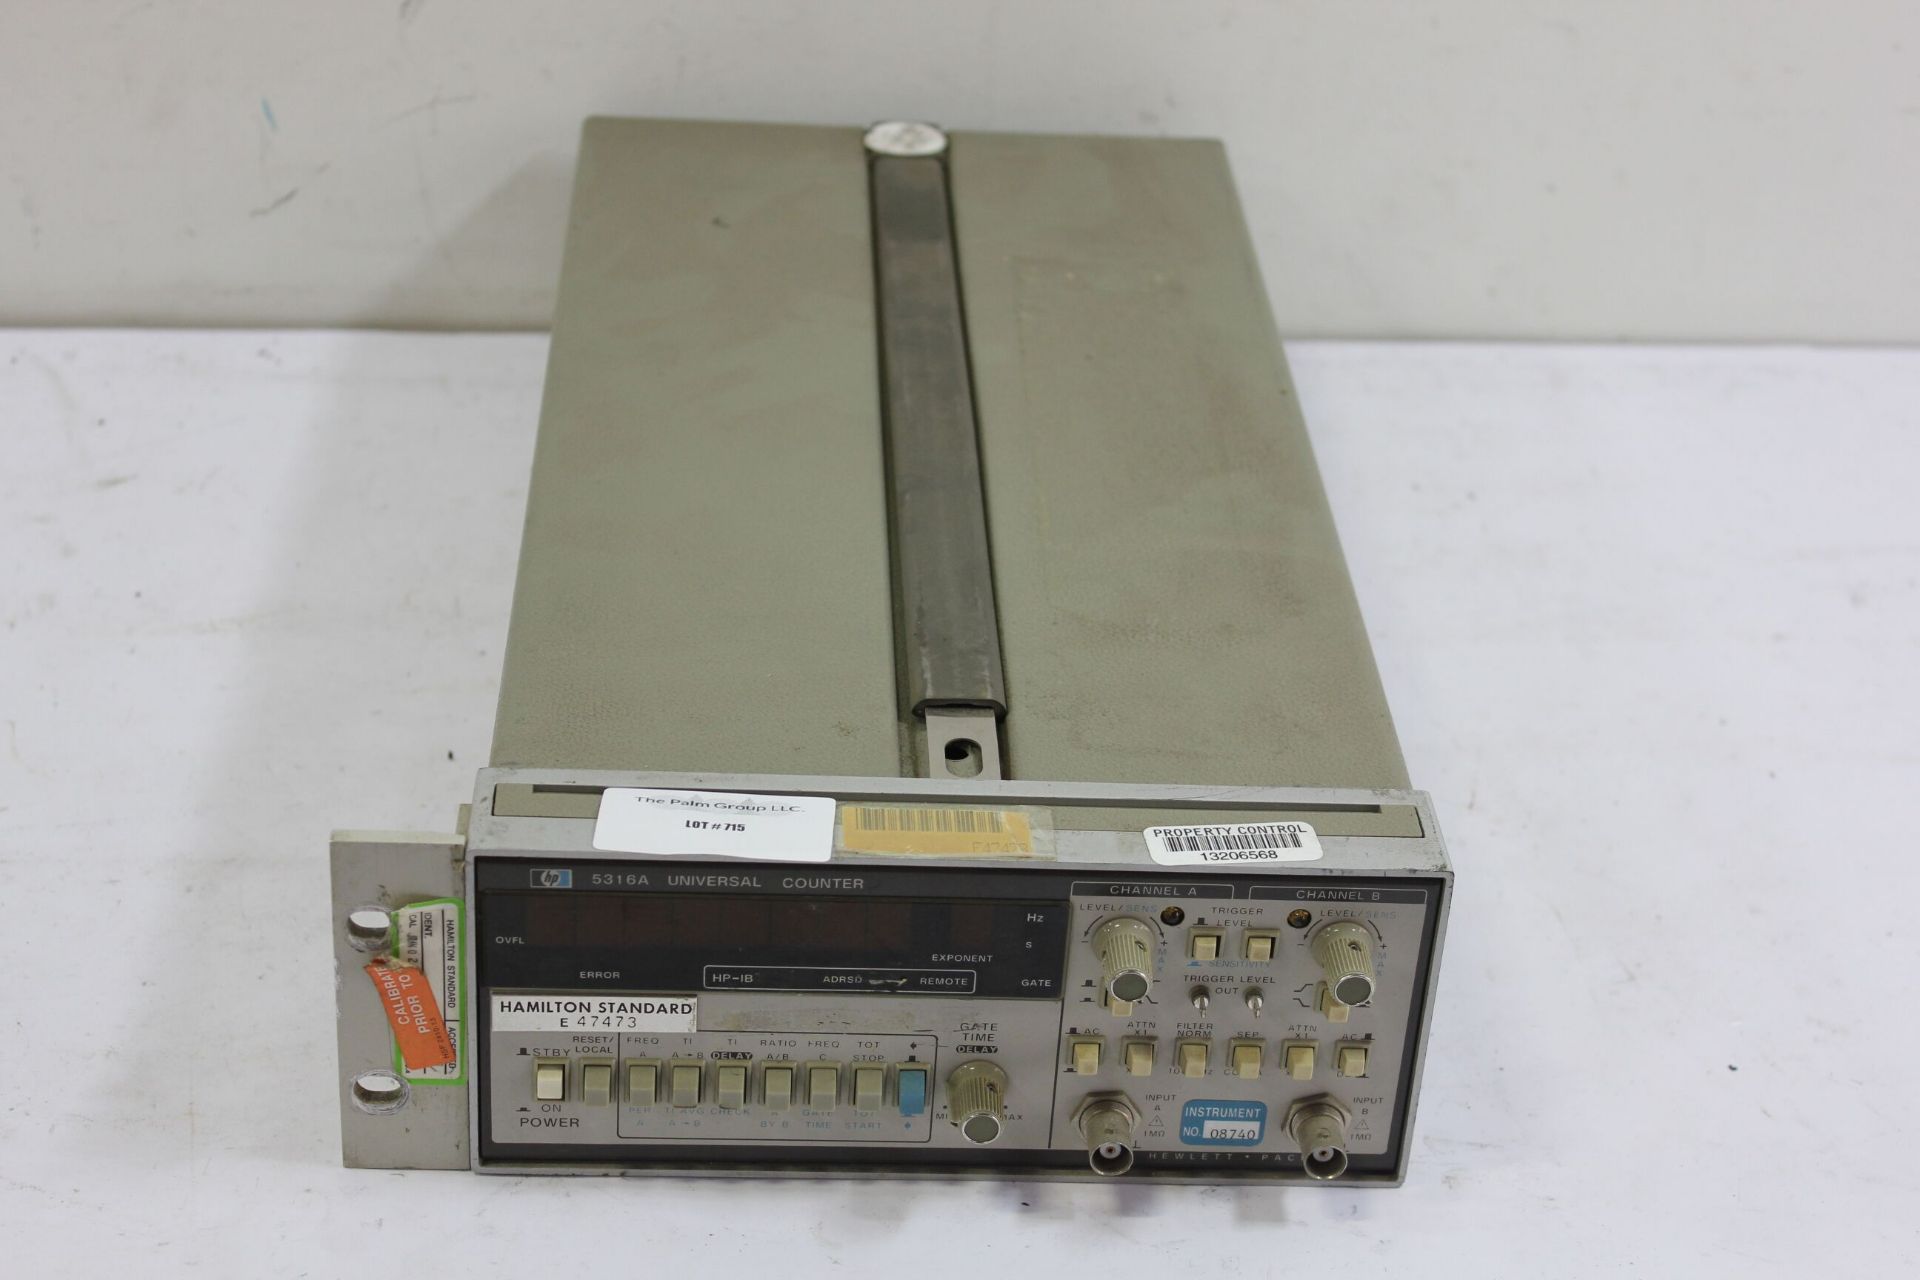 HP 5316A Universal Counter